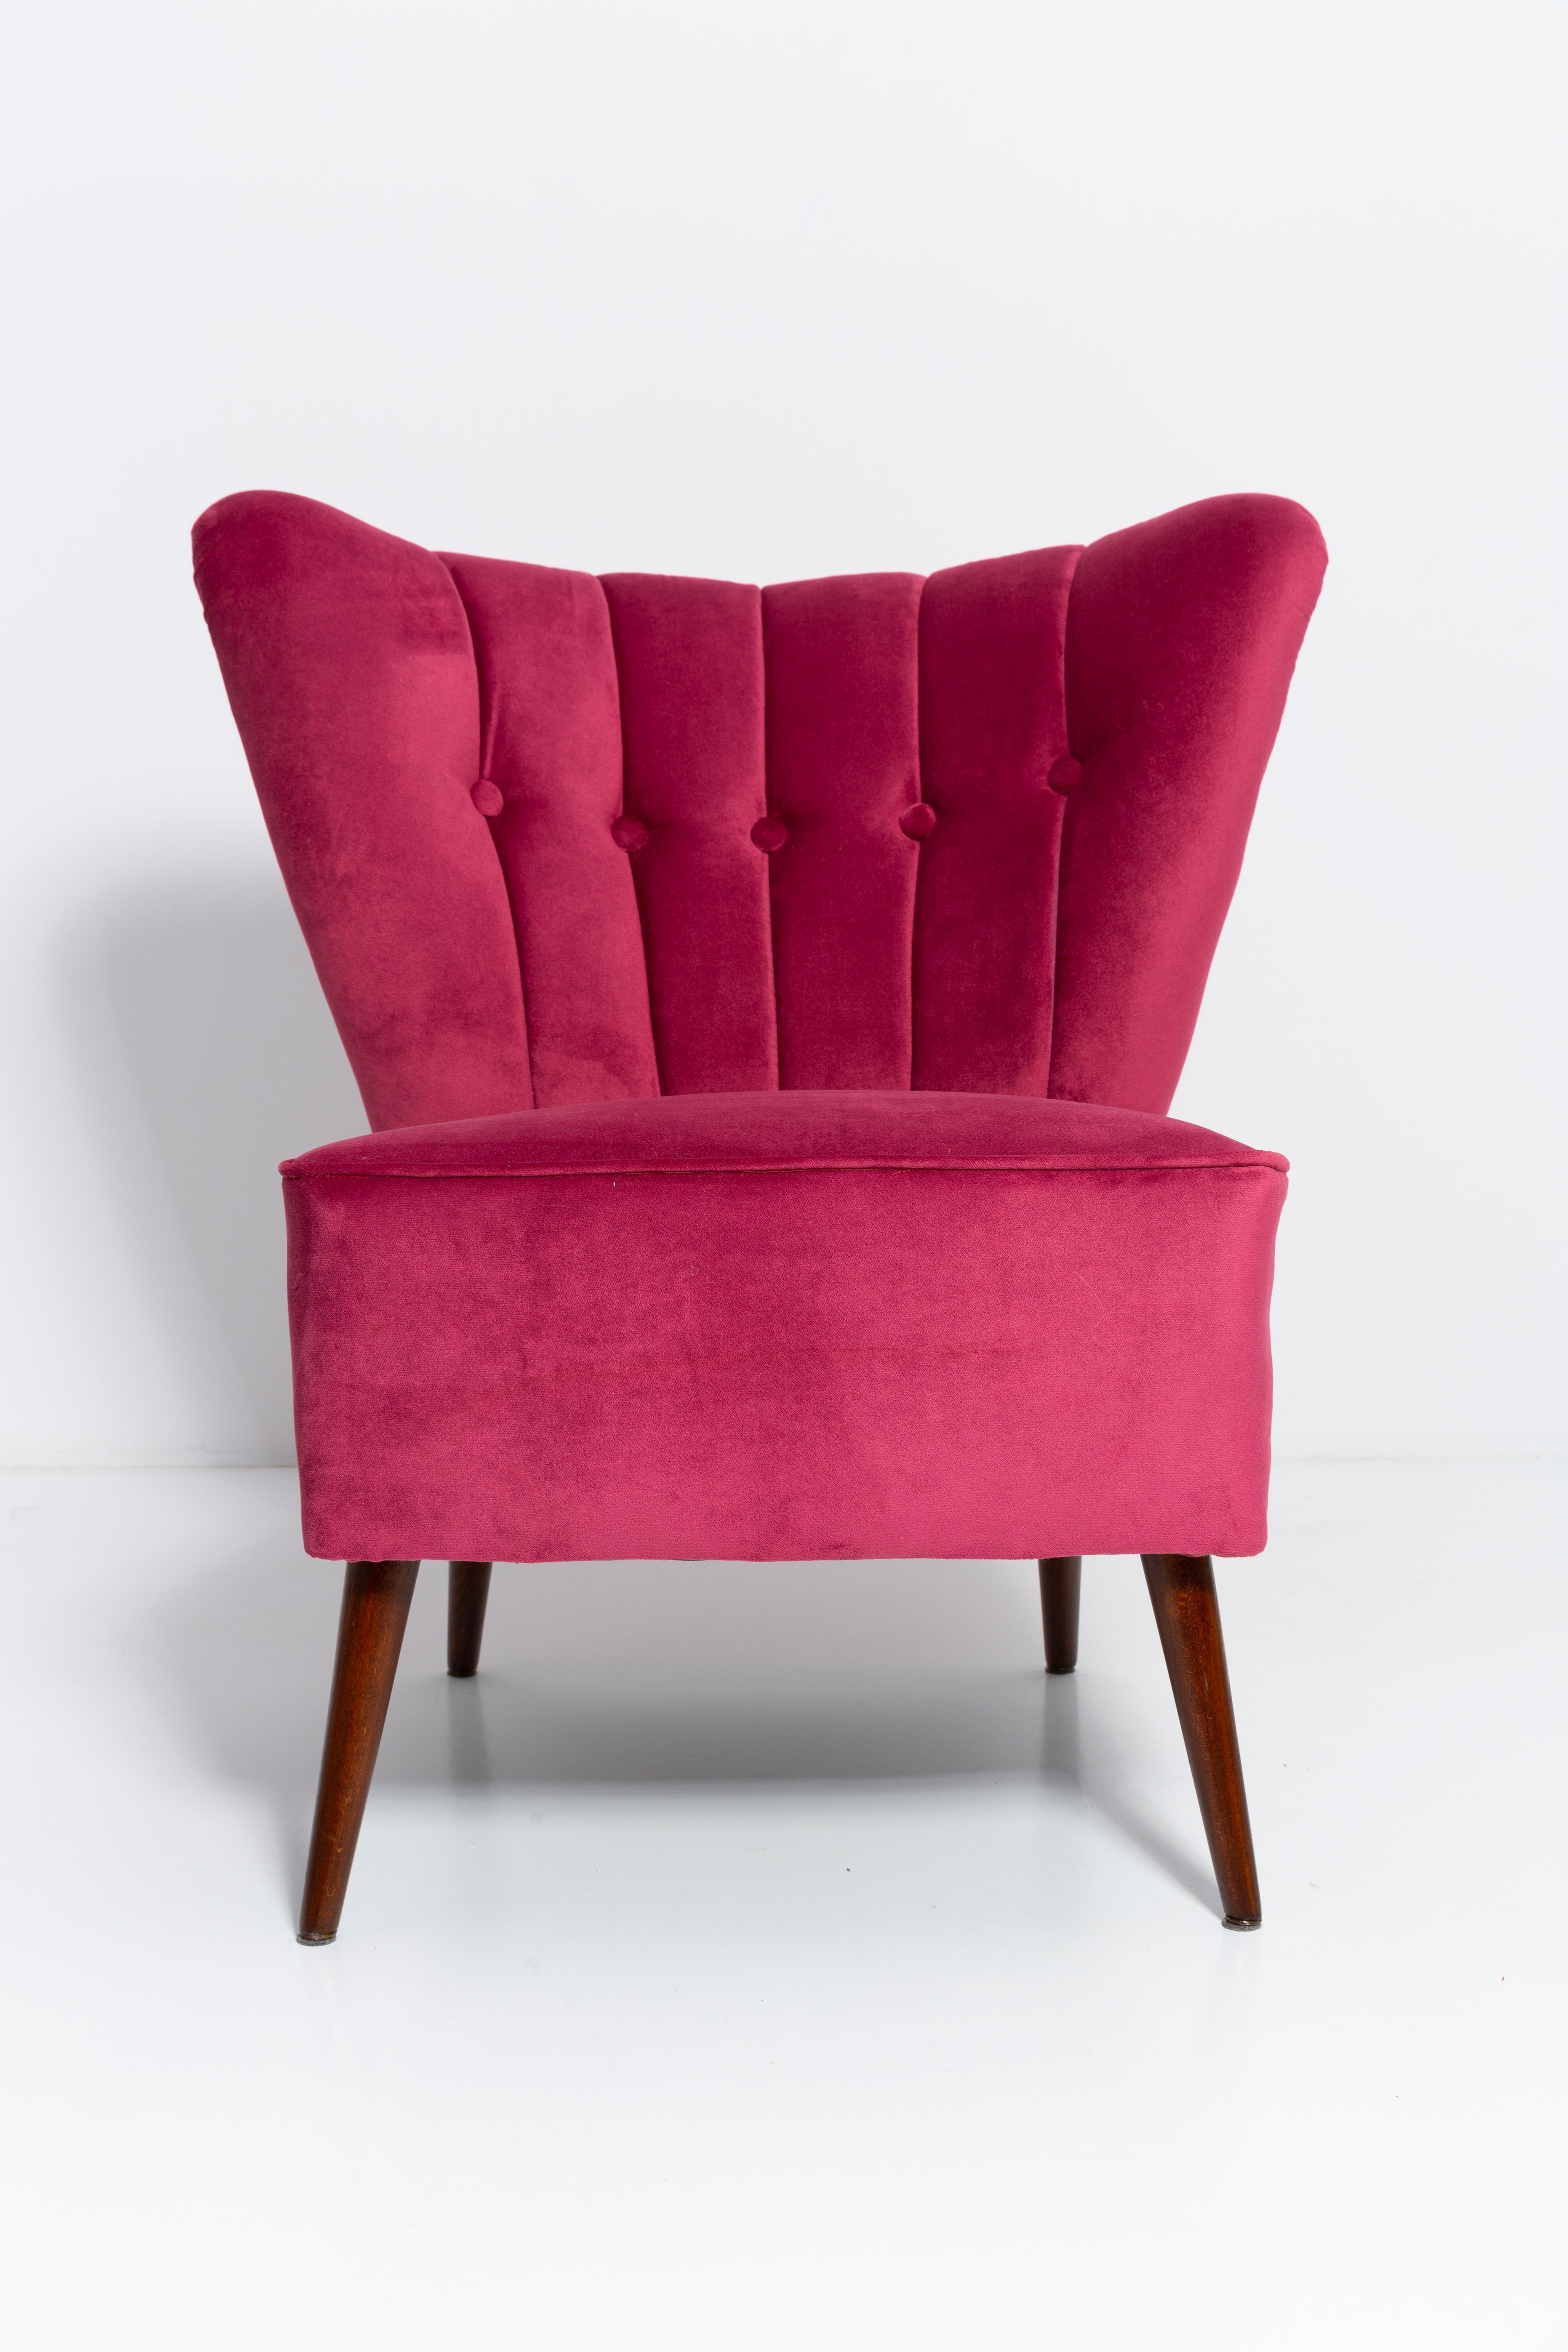 Set of Two Midcentury Magenta Pink Velvet Club Armchairs, Europe, 1960s For Sale 1